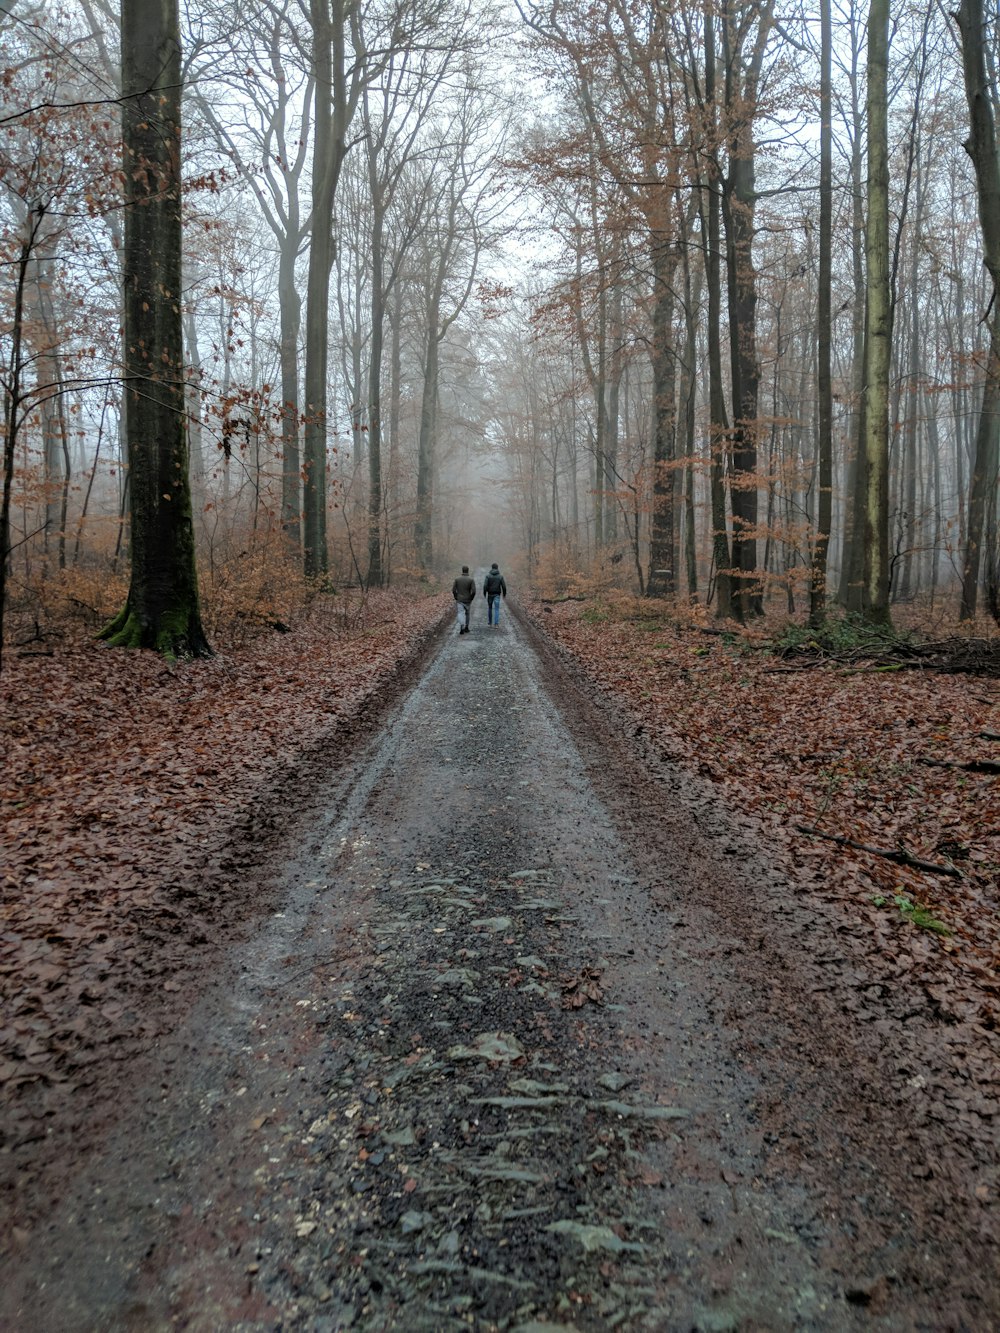 person in black jacket walking on pathway between bare trees during daytime